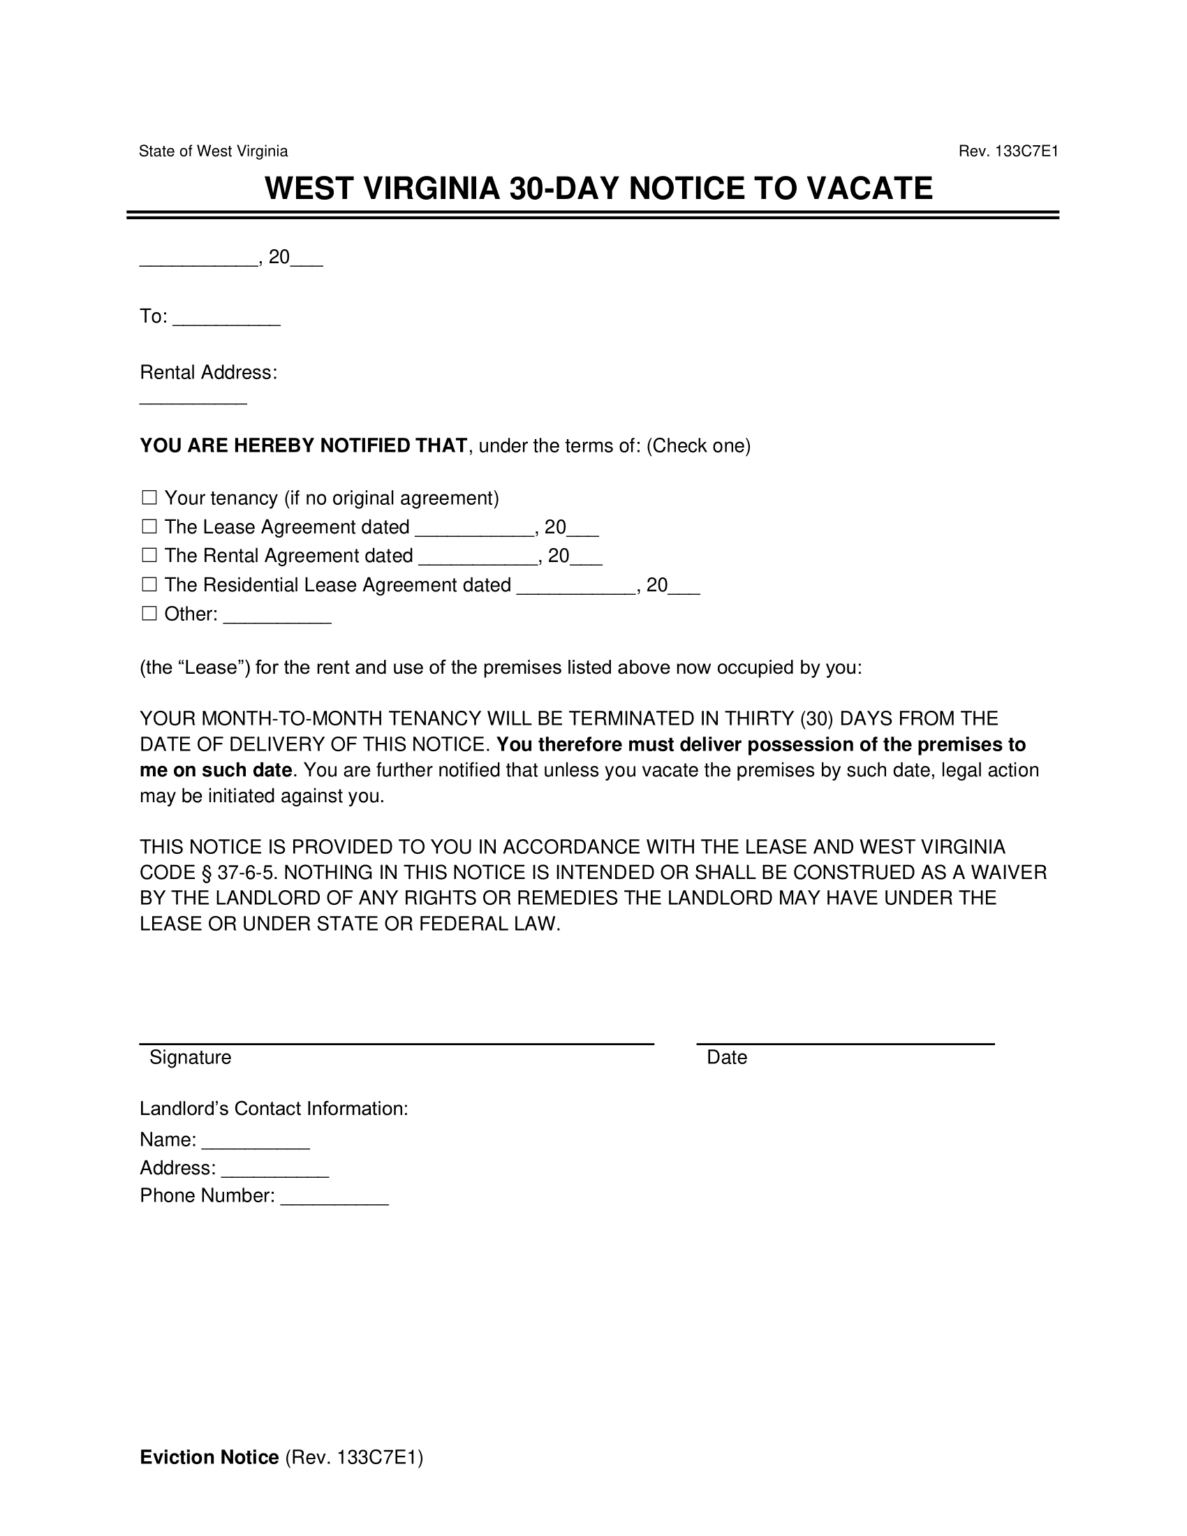 Free West Virginia 30-Day Notice to Vacate | Lease Termination Letter ...